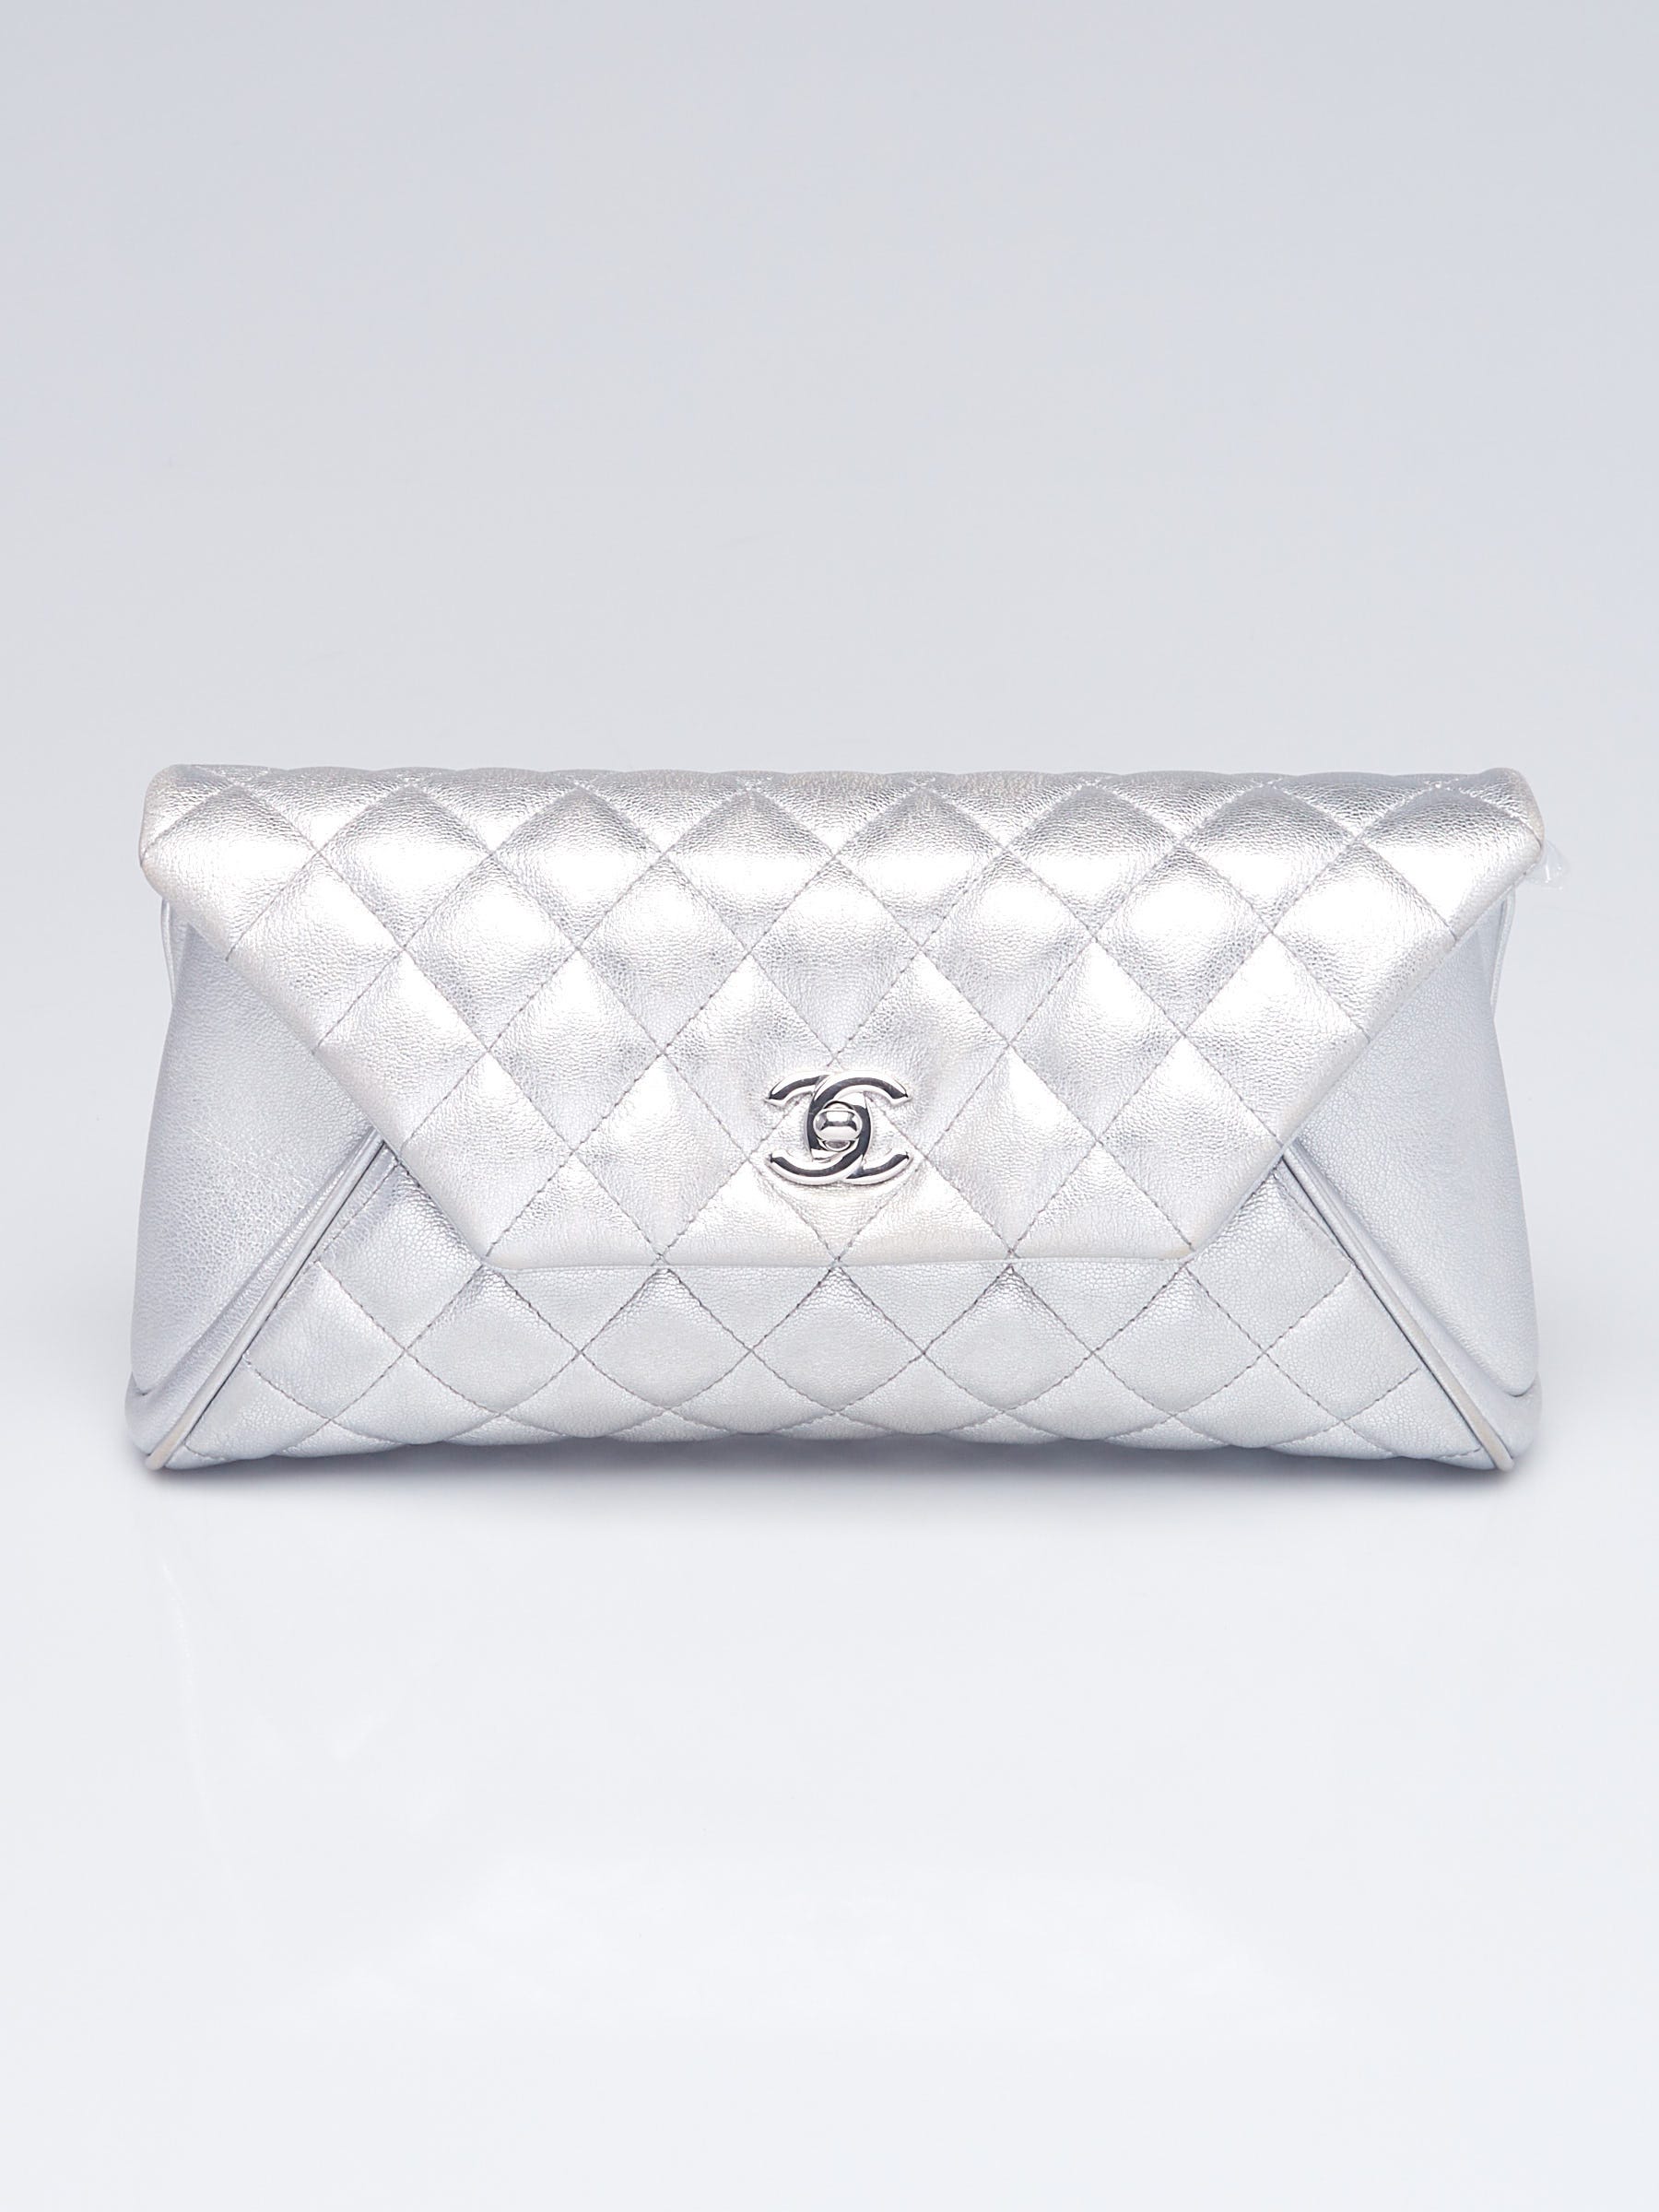 Chanel Silver Quilted Lambskin Leather Fold Up Again Clutch Bag